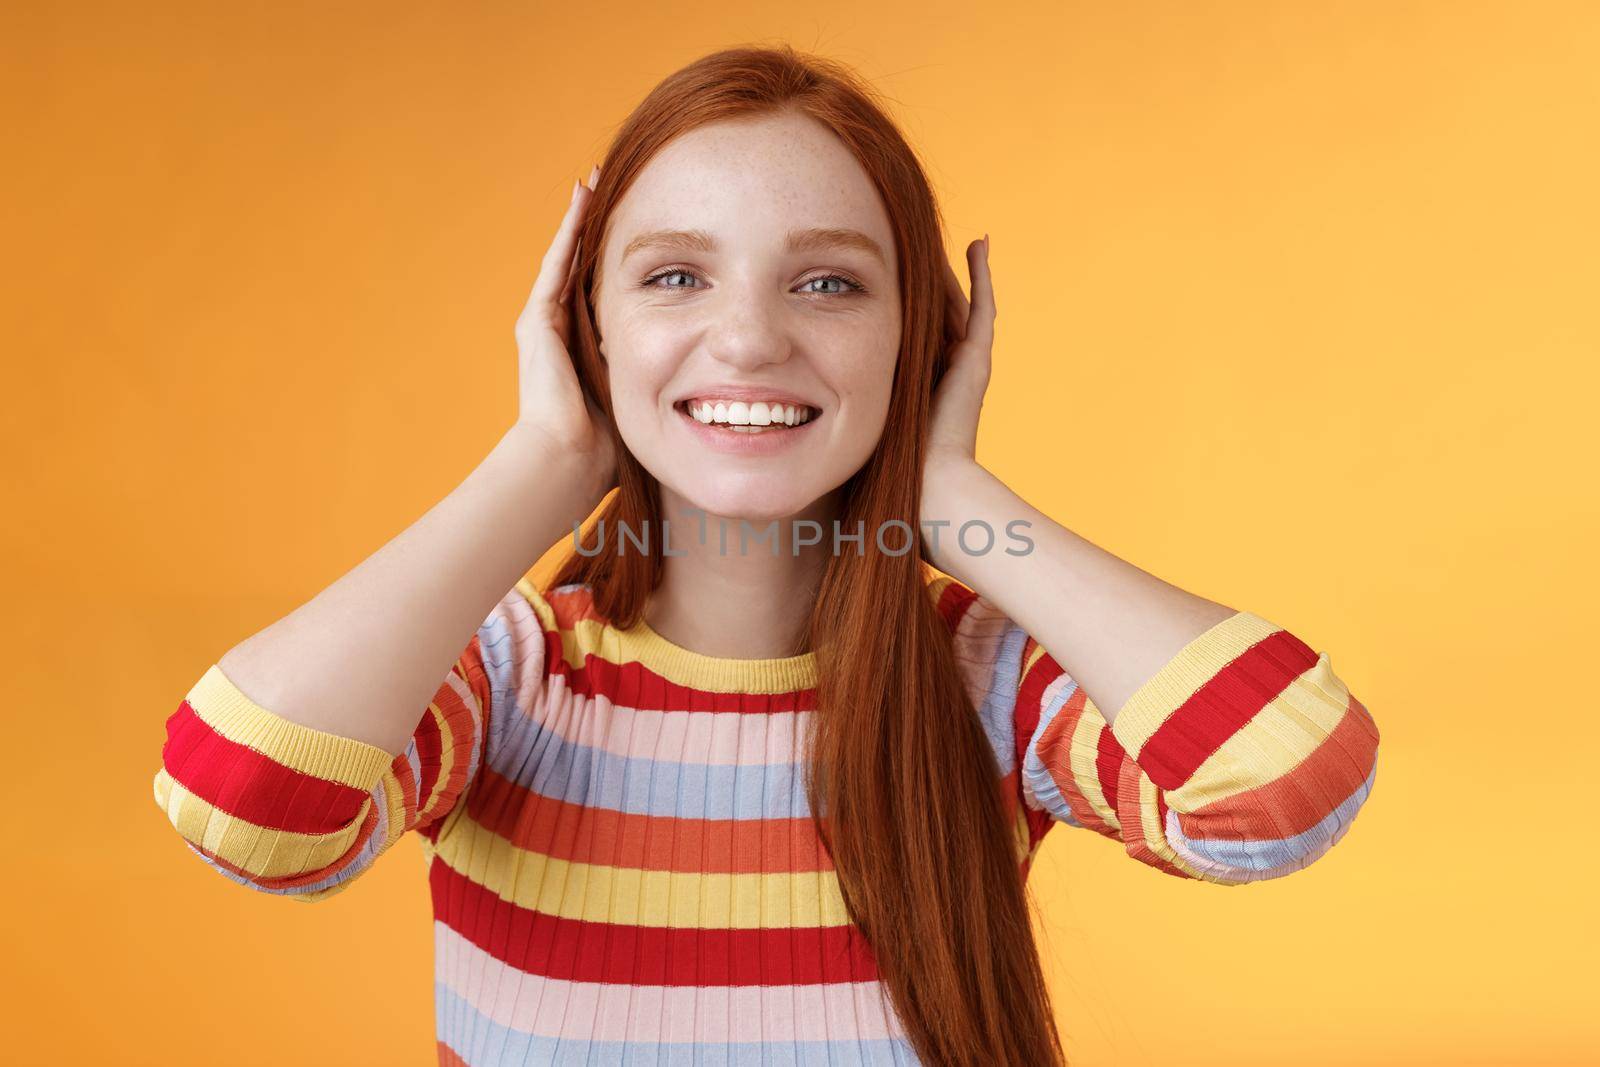 Lifestyle. Cute playful tender smiling ginger girl blue eyes silly cover ears palms grinning fool around not hear anyone carefree unwilling listen noisy people standing careless relaxed orange background.